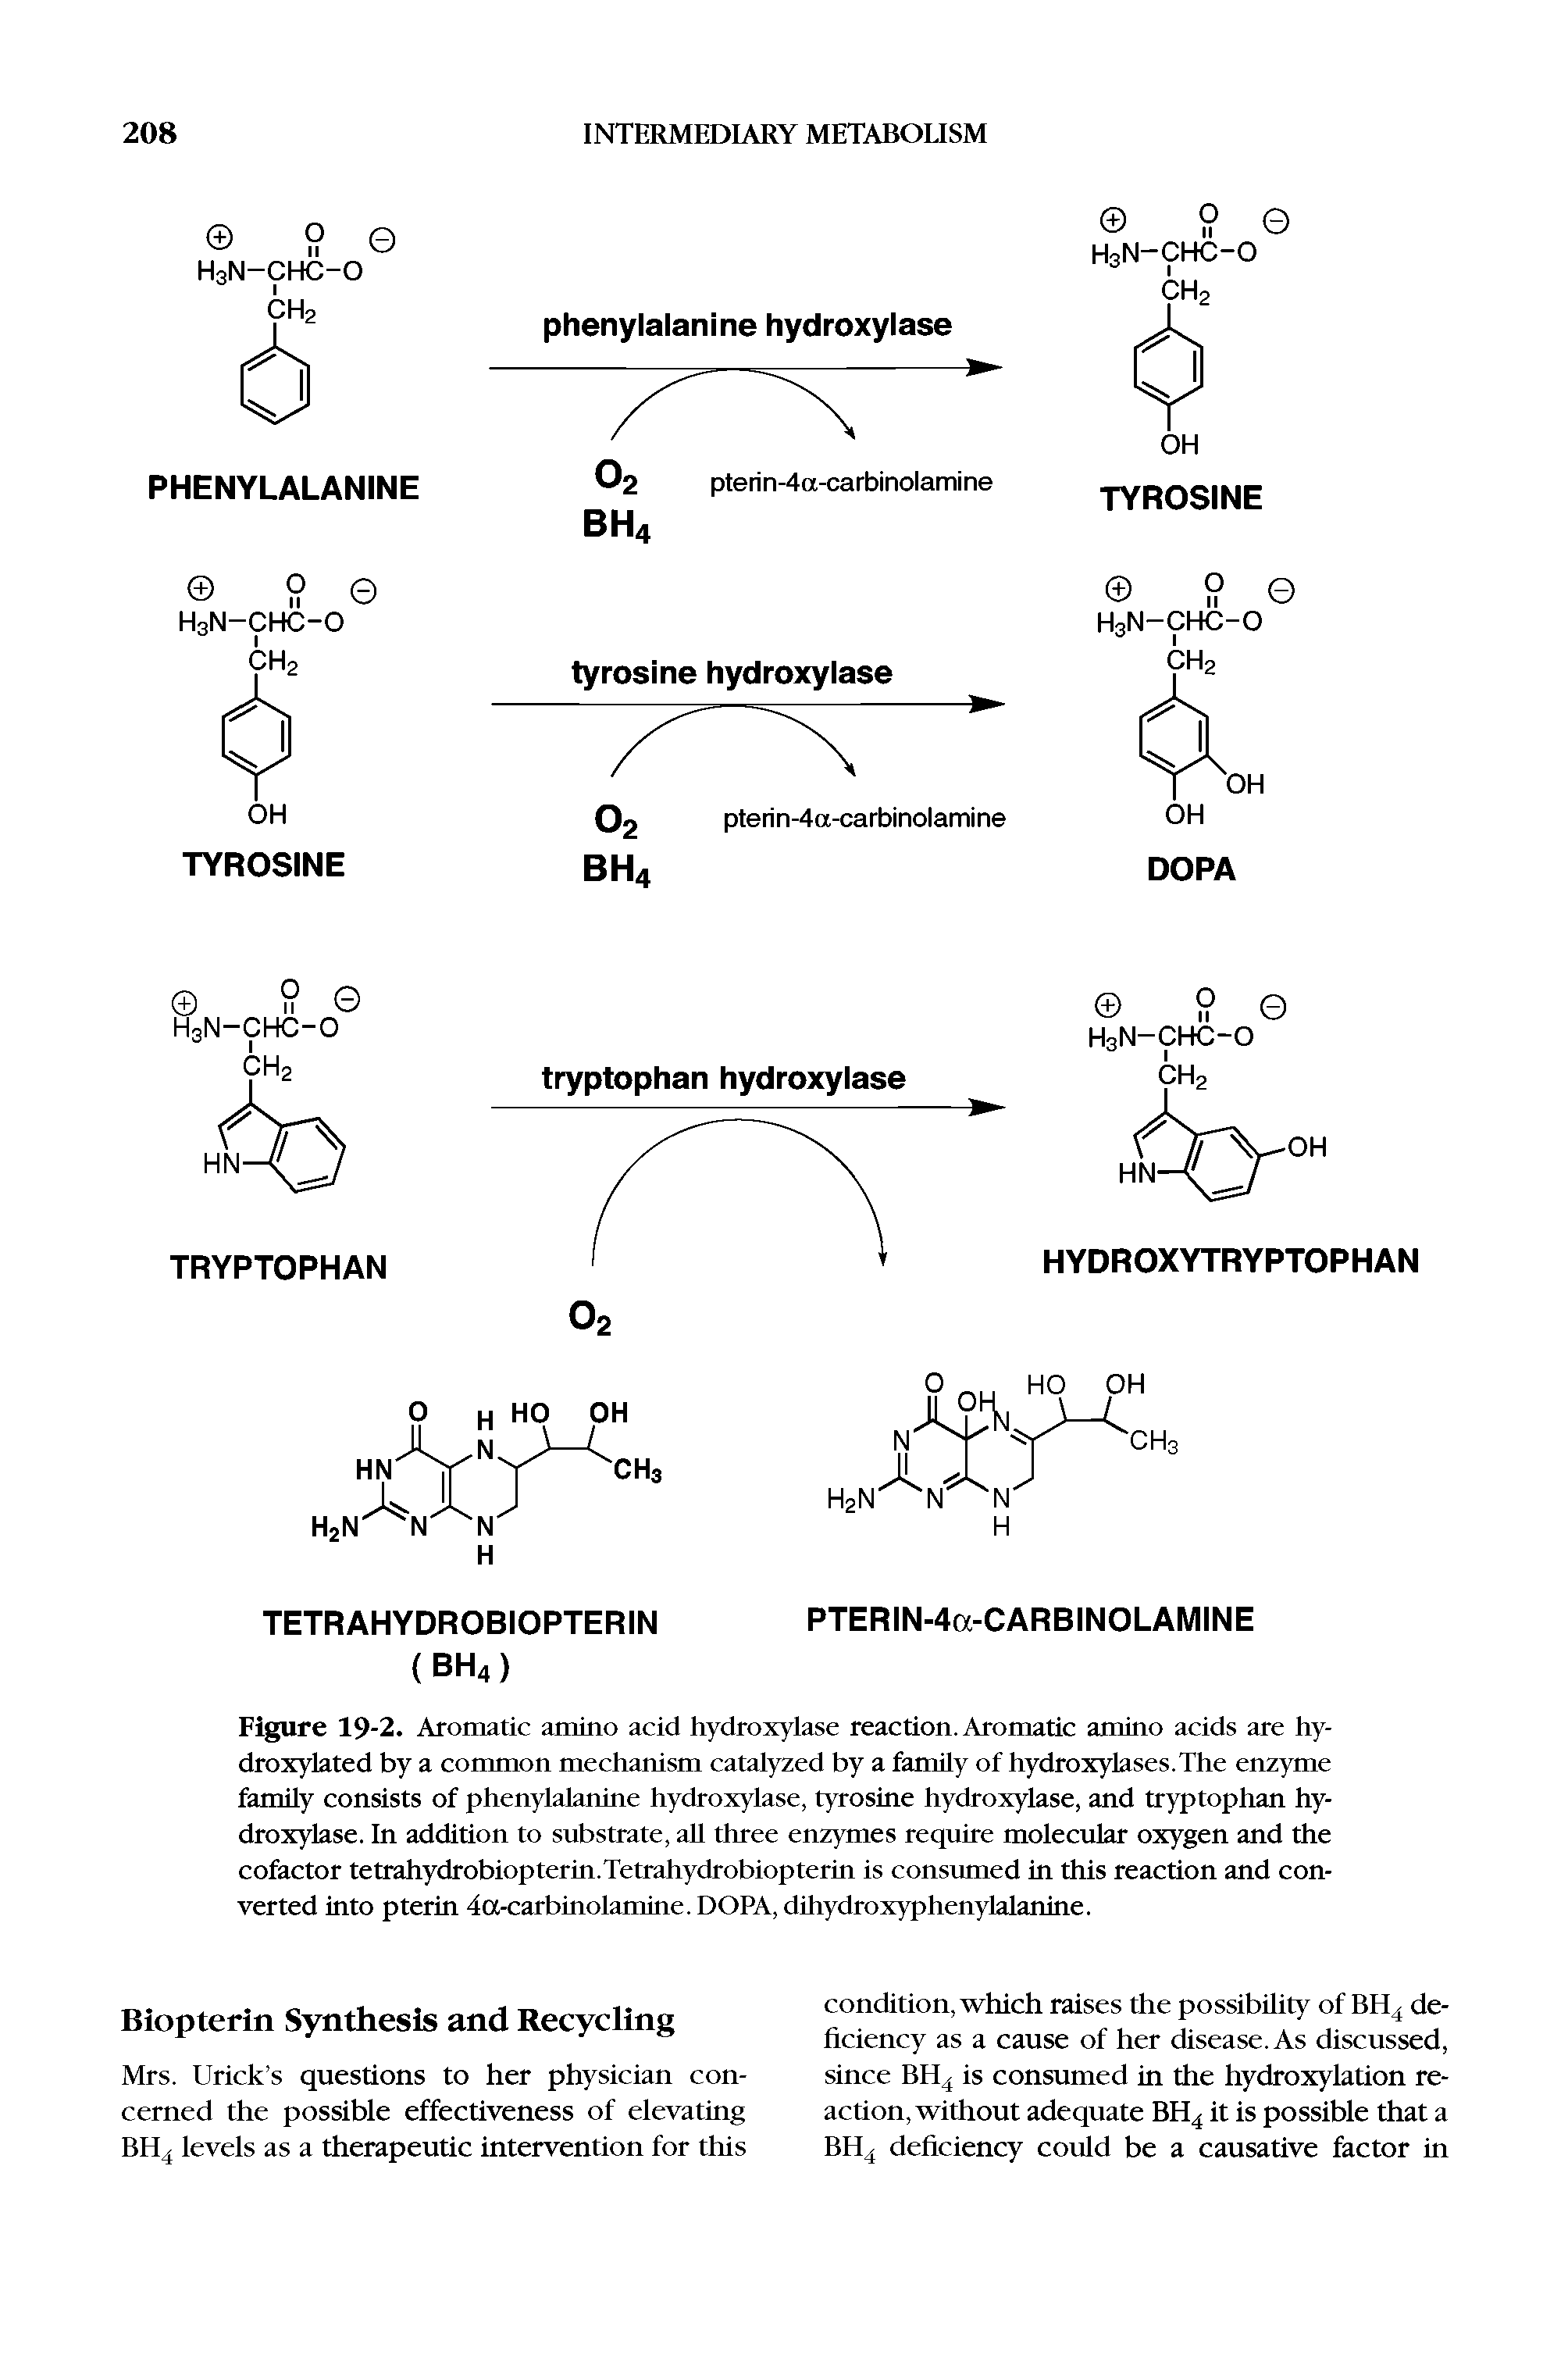 Figure 19-2. Aromatic amino acid hydroxylase reaction. Aromatic amino acids are hy-droxylated by a common mechanism catalyzed by a family of hydroxylases.The enzyme family consists of phenylalanine hydroxylase, tyrosine hydroxylase, and tryptophan hydroxylase. In addition to substrate, all three enzymes require molecular oxygen and the cofactor tetrahydrobiopterin.Tetrahydrobiopterin is consumed in this reaction and converted into pterin 4cx-carbinolamine. DOPA, dihydroxyphenylalanine.